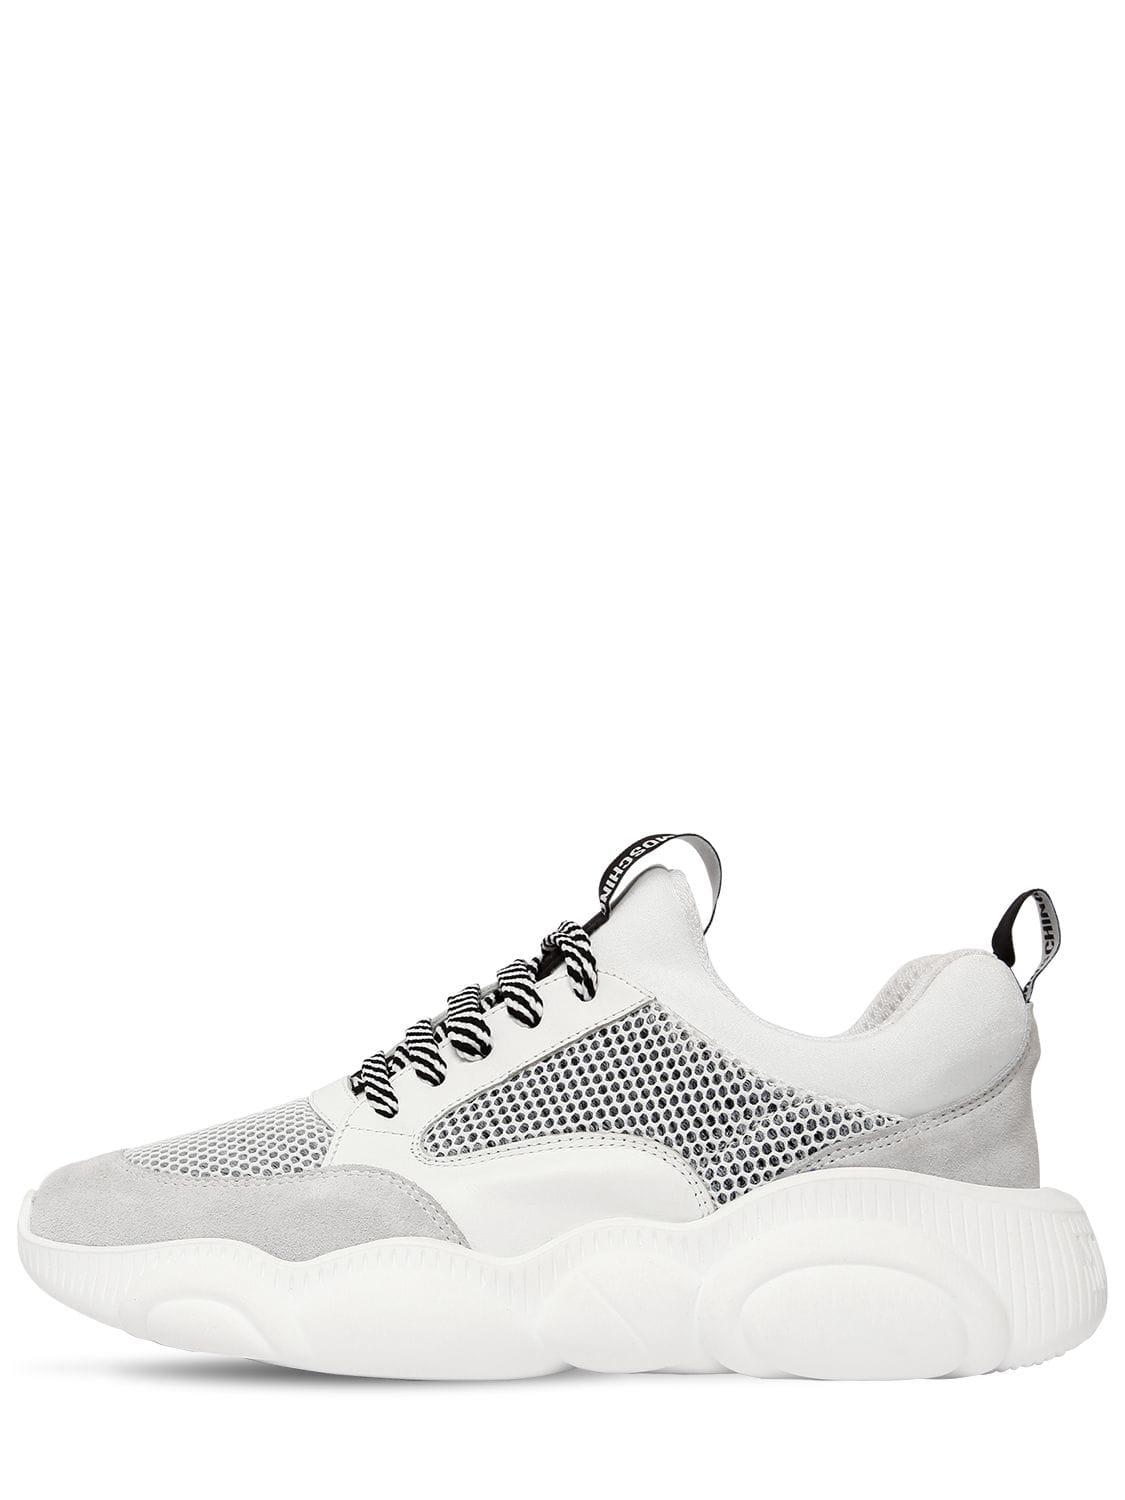 Moschino 30mm Teddy Shoes Mesh & Leather Sneakers in White - Save 35% ...